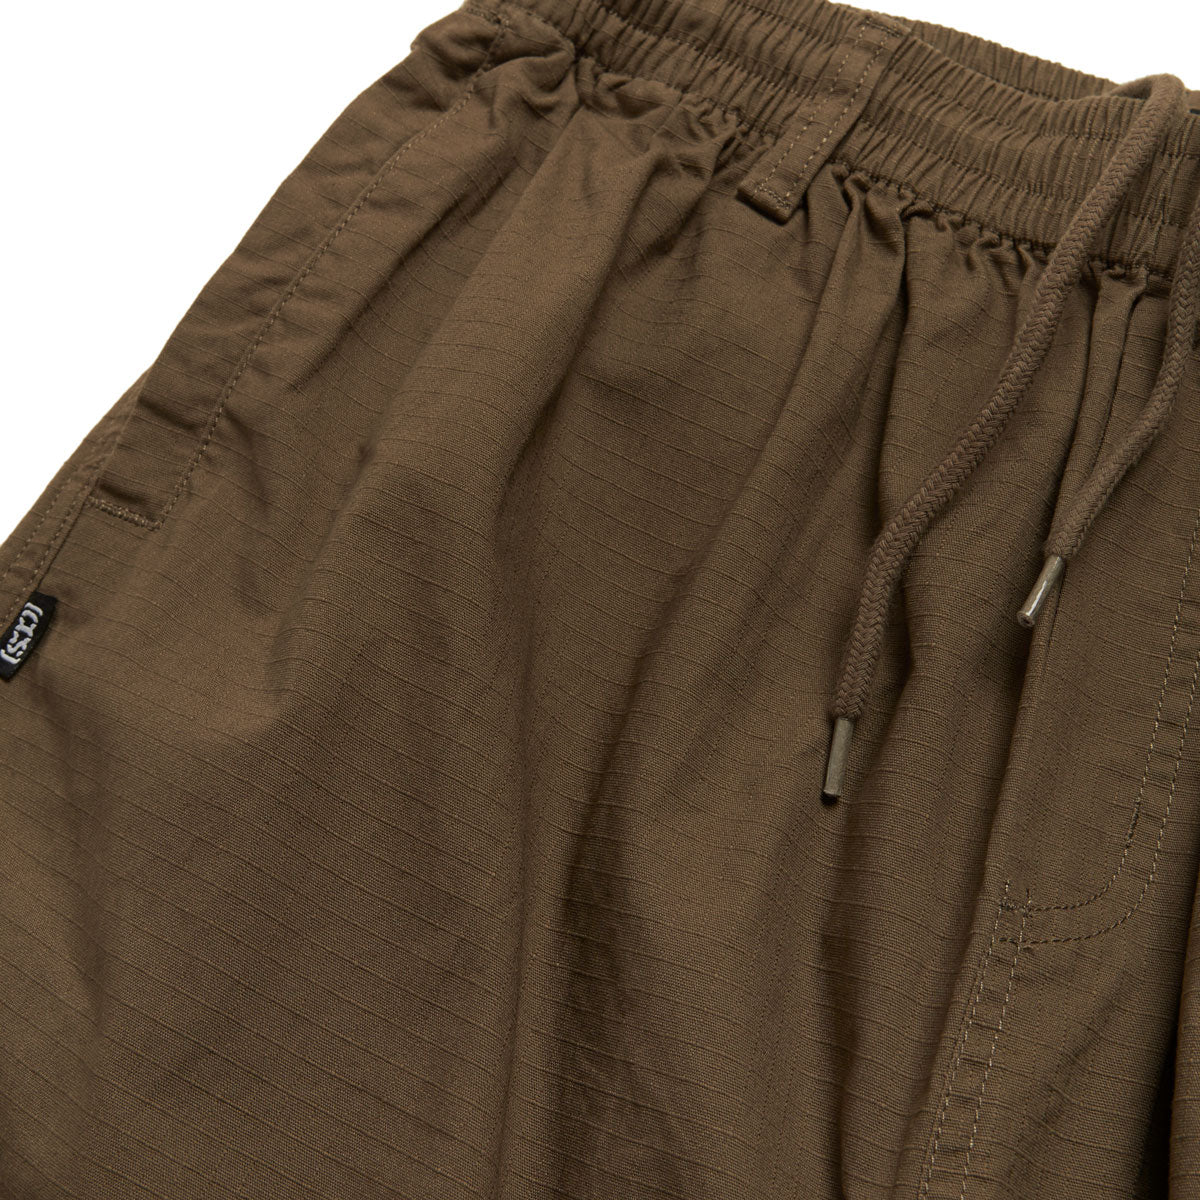 CCS Easy Ripstop Cargo Pants - Brown image 9